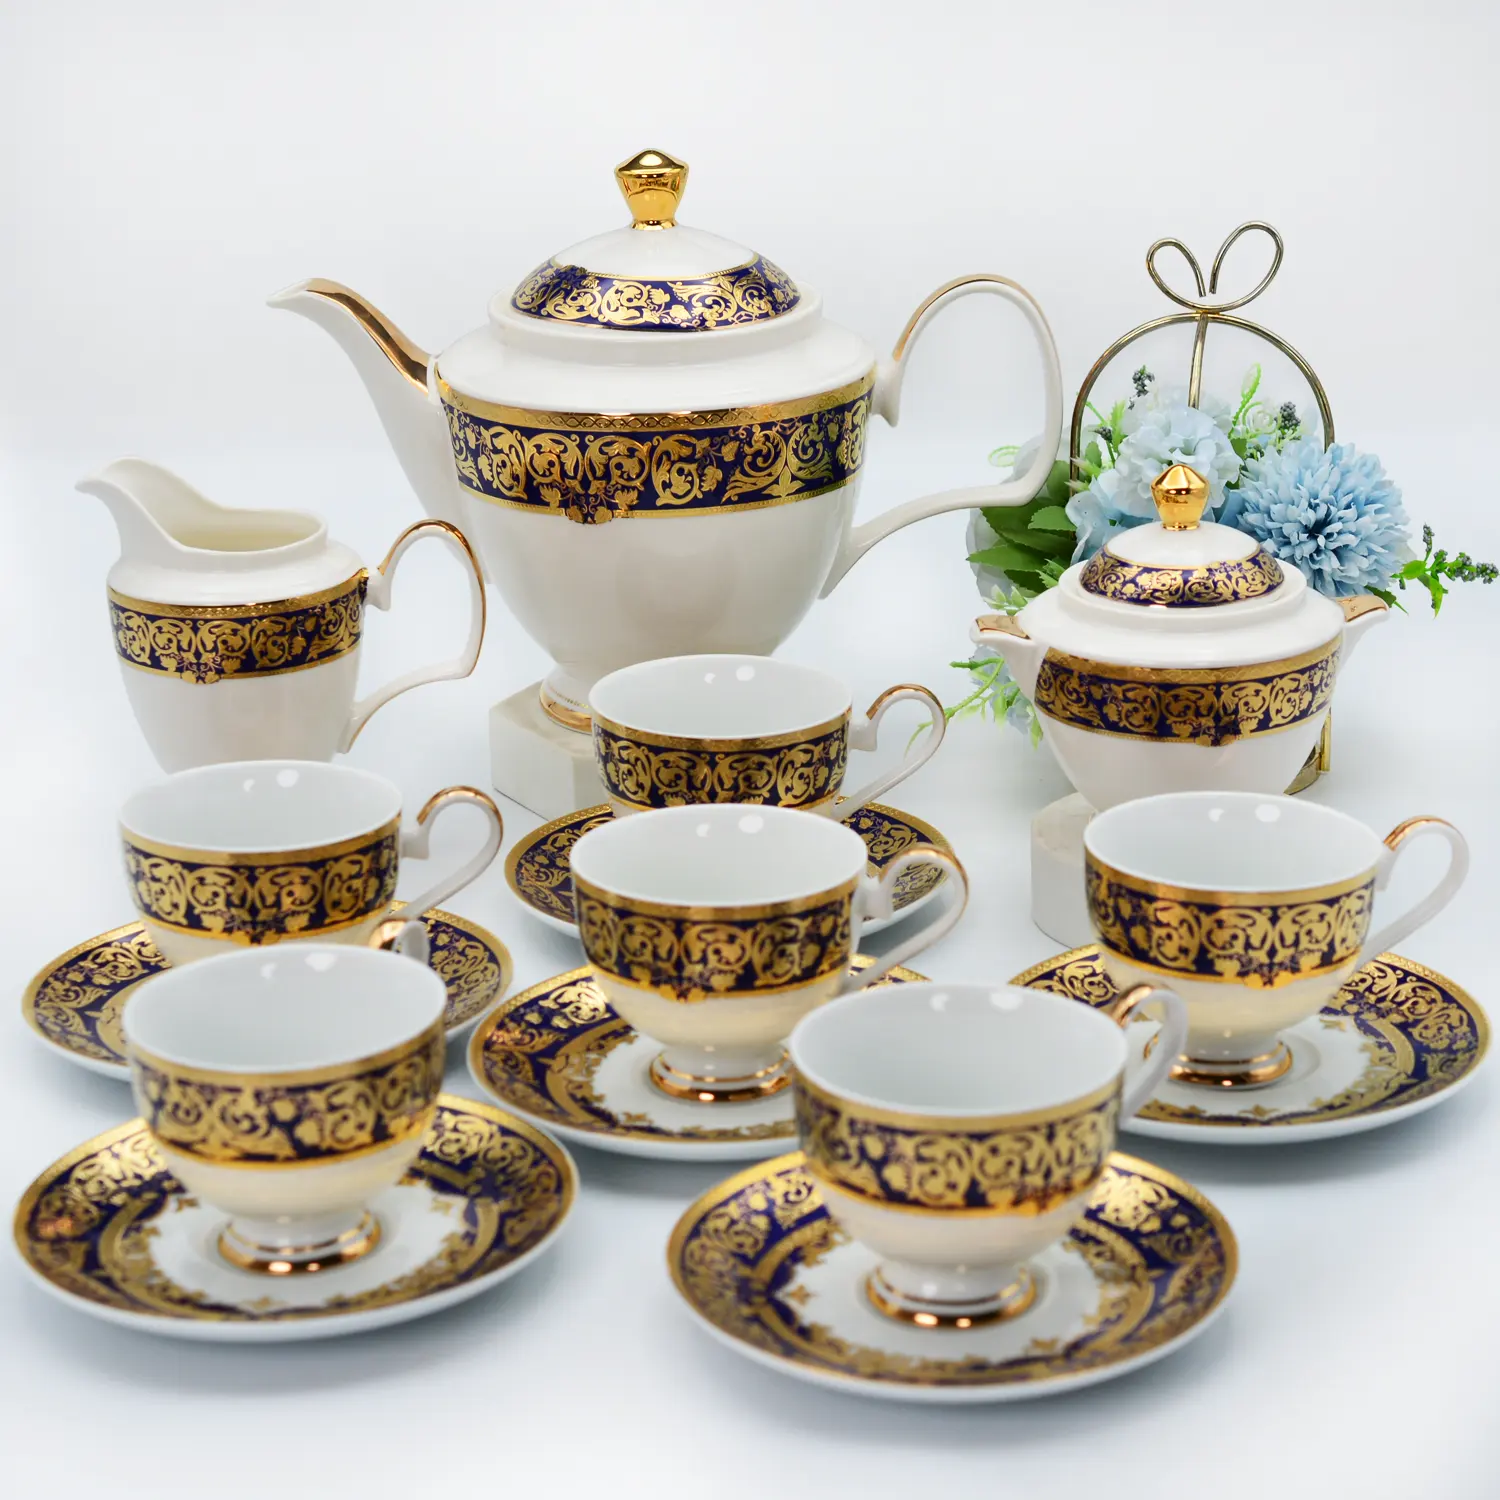 17pcs Luxurious classical style ceramic tea set gold porcelain drinkware set for afternoon tea 6 person